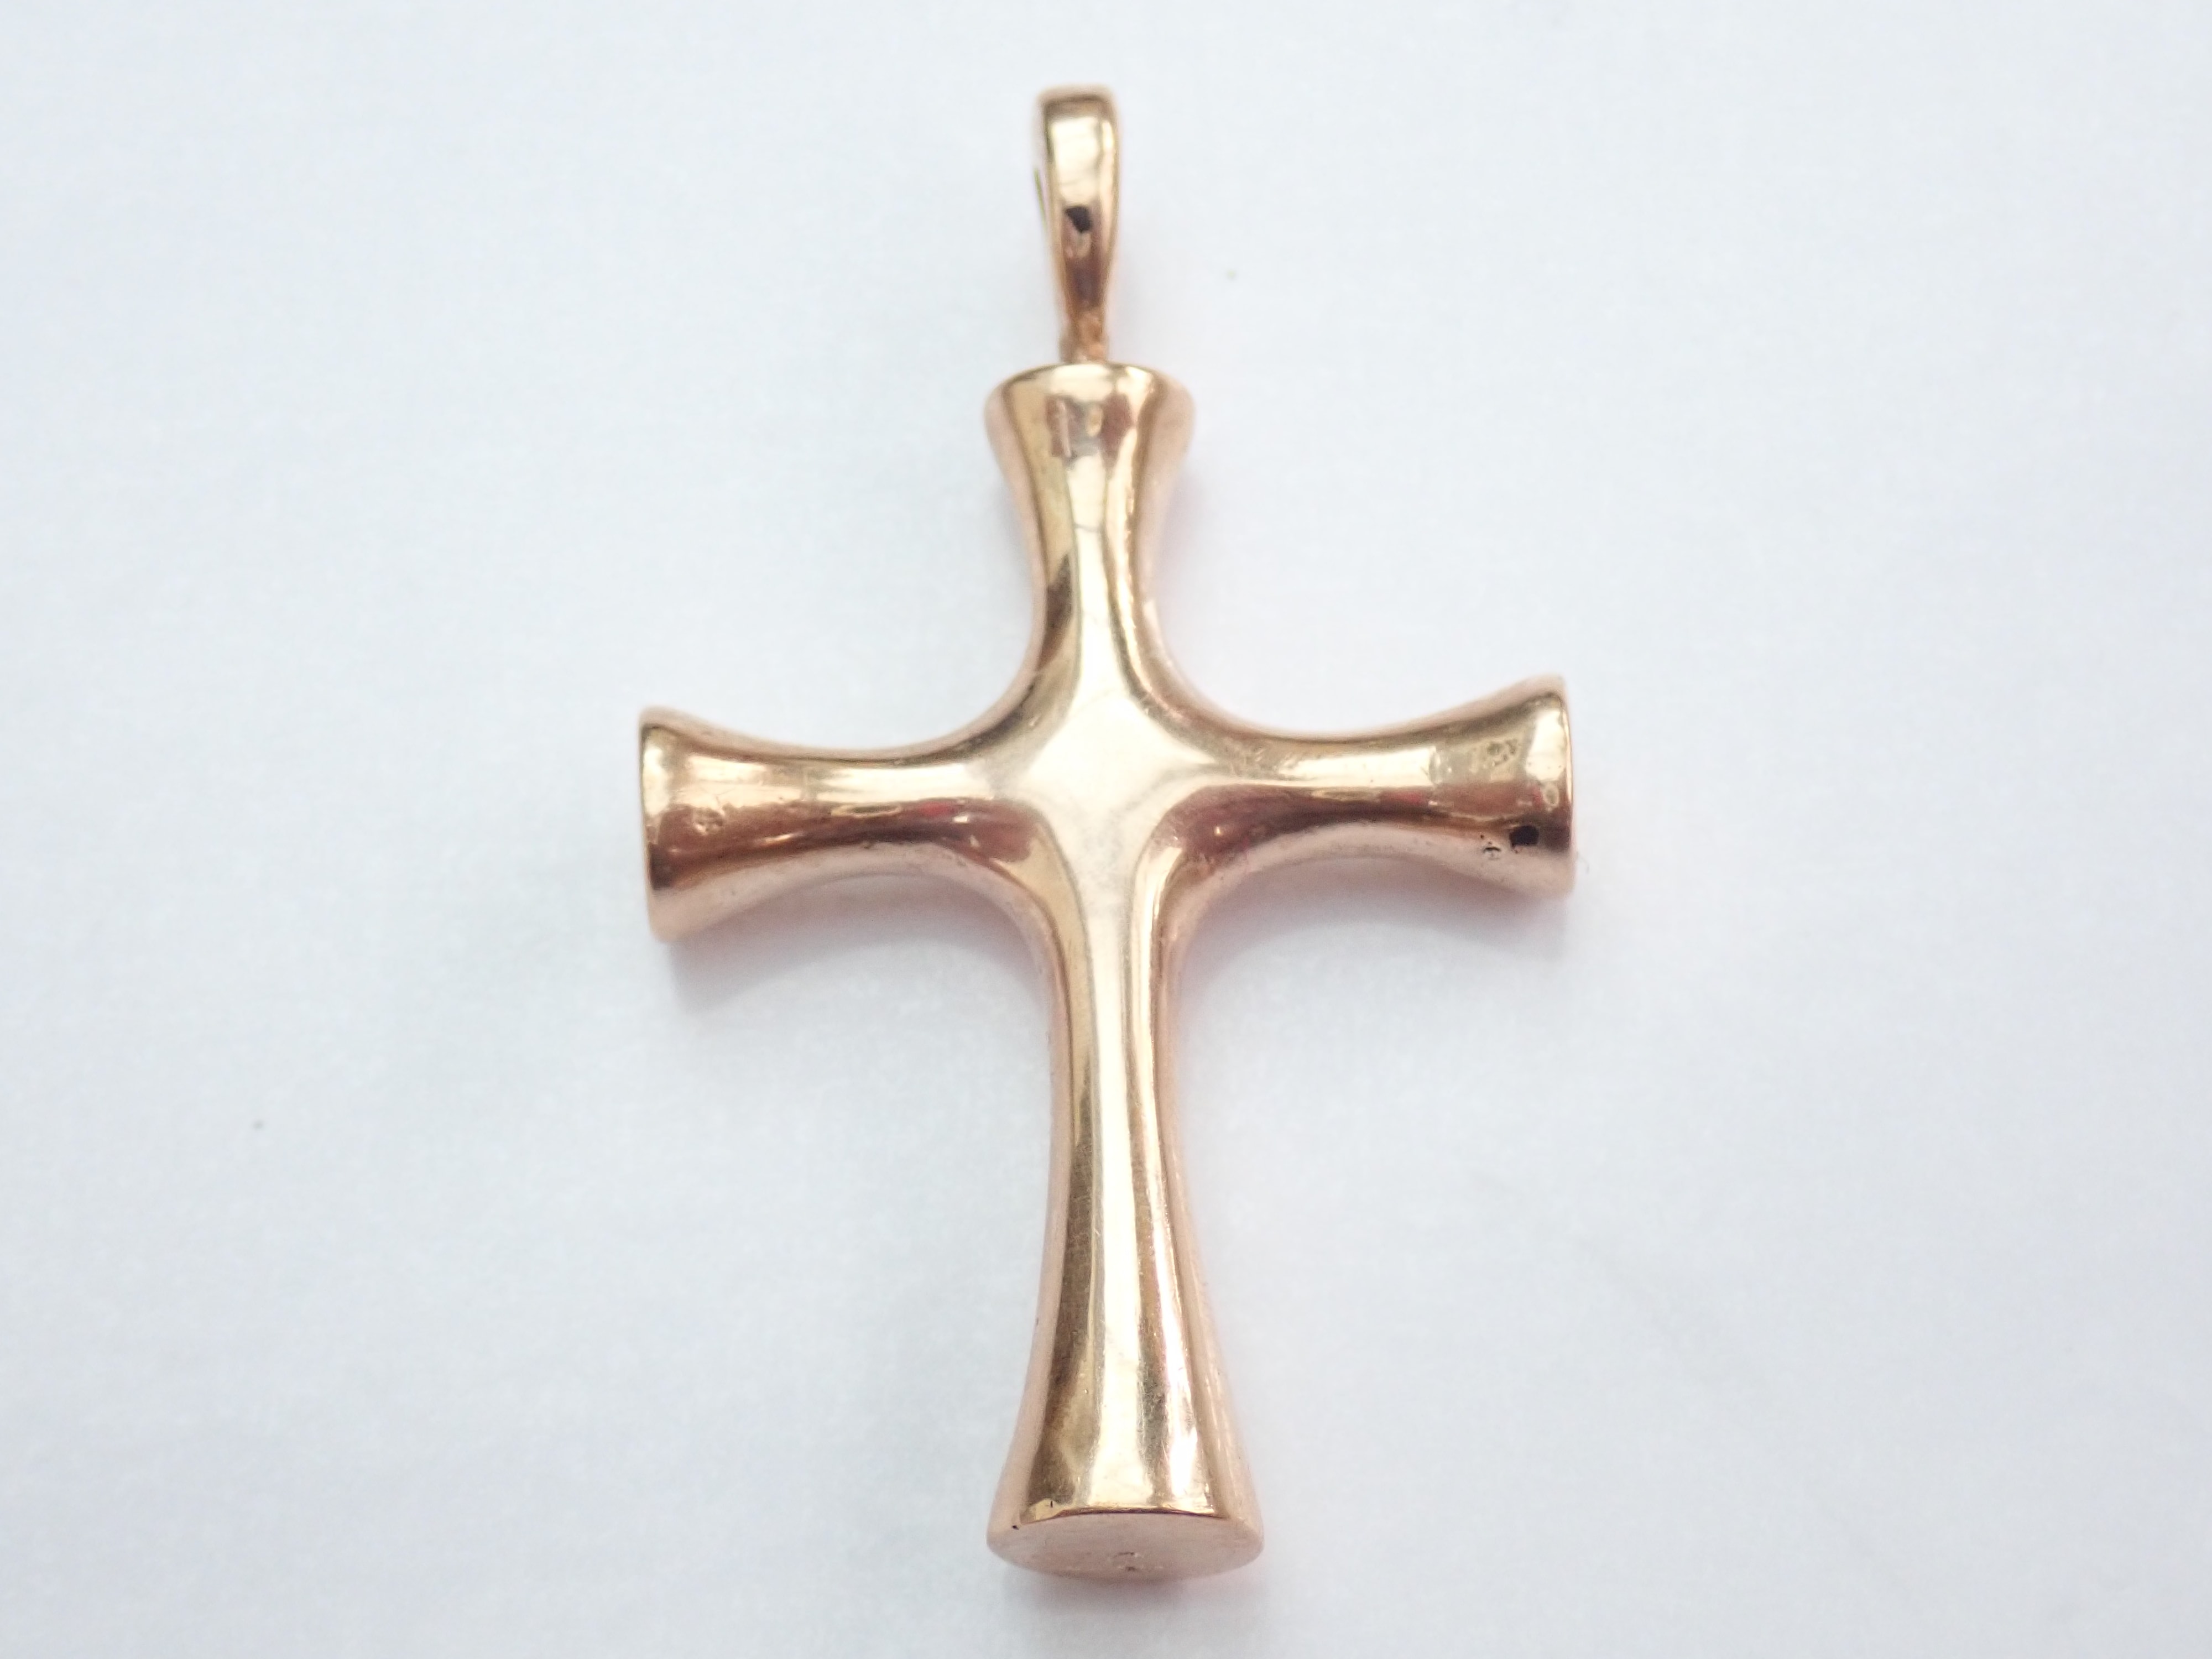 9K Gold Cross Crucifix Pendant and Chain 17.6 gms